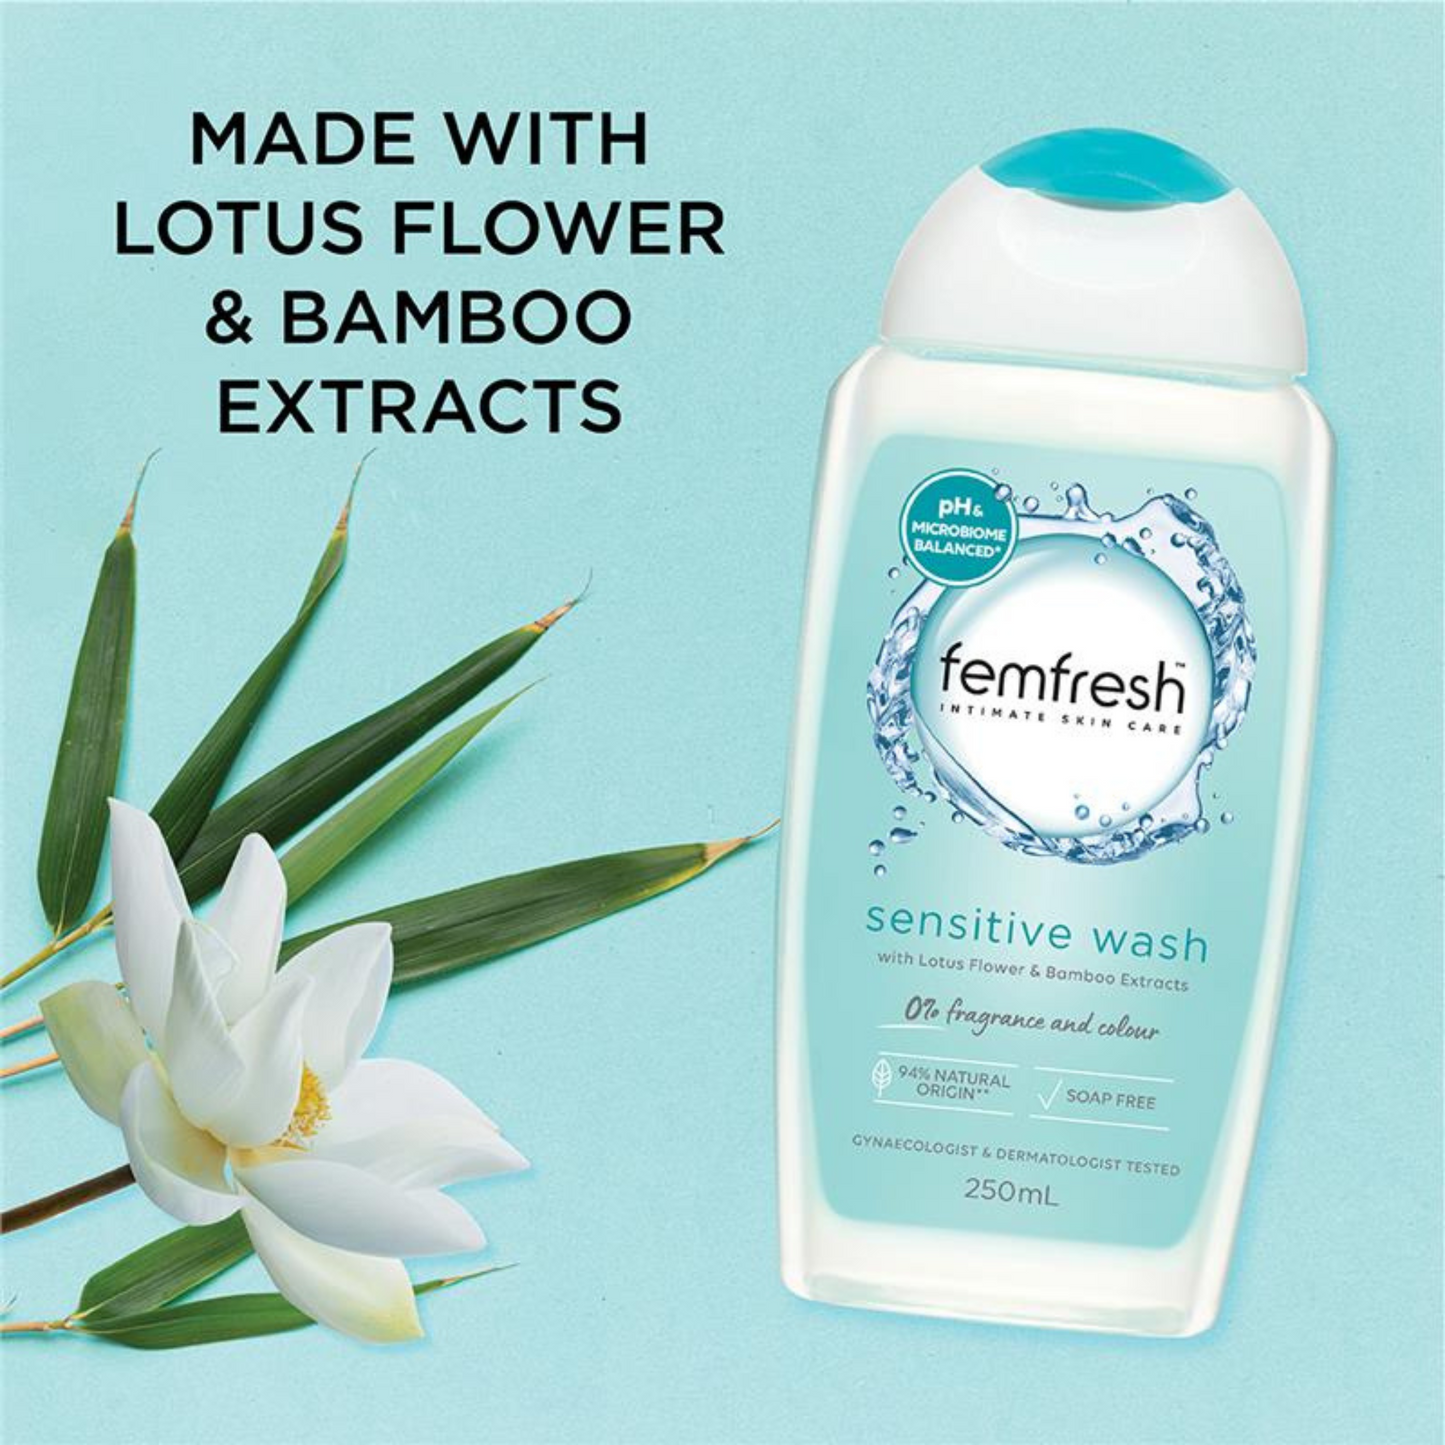 Femfresh Soap Free Sensitive Wash gently cleans the skin in your intimate area without soap, fragrance or colour. Suitable for sensitive skin & use during period. Gynaecologist & dermatologist tested. Best genuine real foreign imported Australian Aussie premium brand feminine care hygiene price in Dhaka Bangladesh.